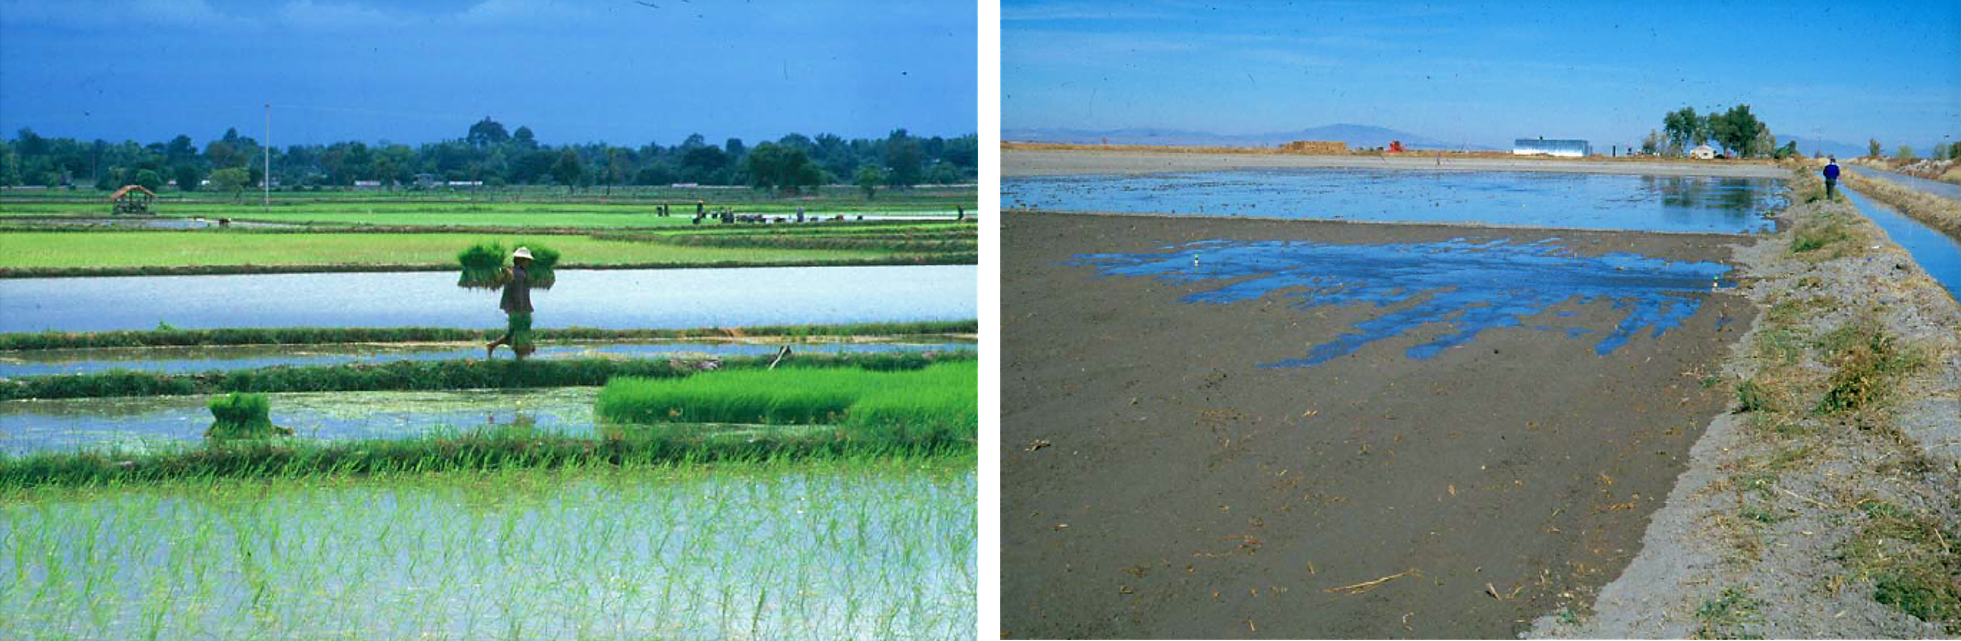 Two typical surface basin irrigation fields. Source: WALKER (2003)